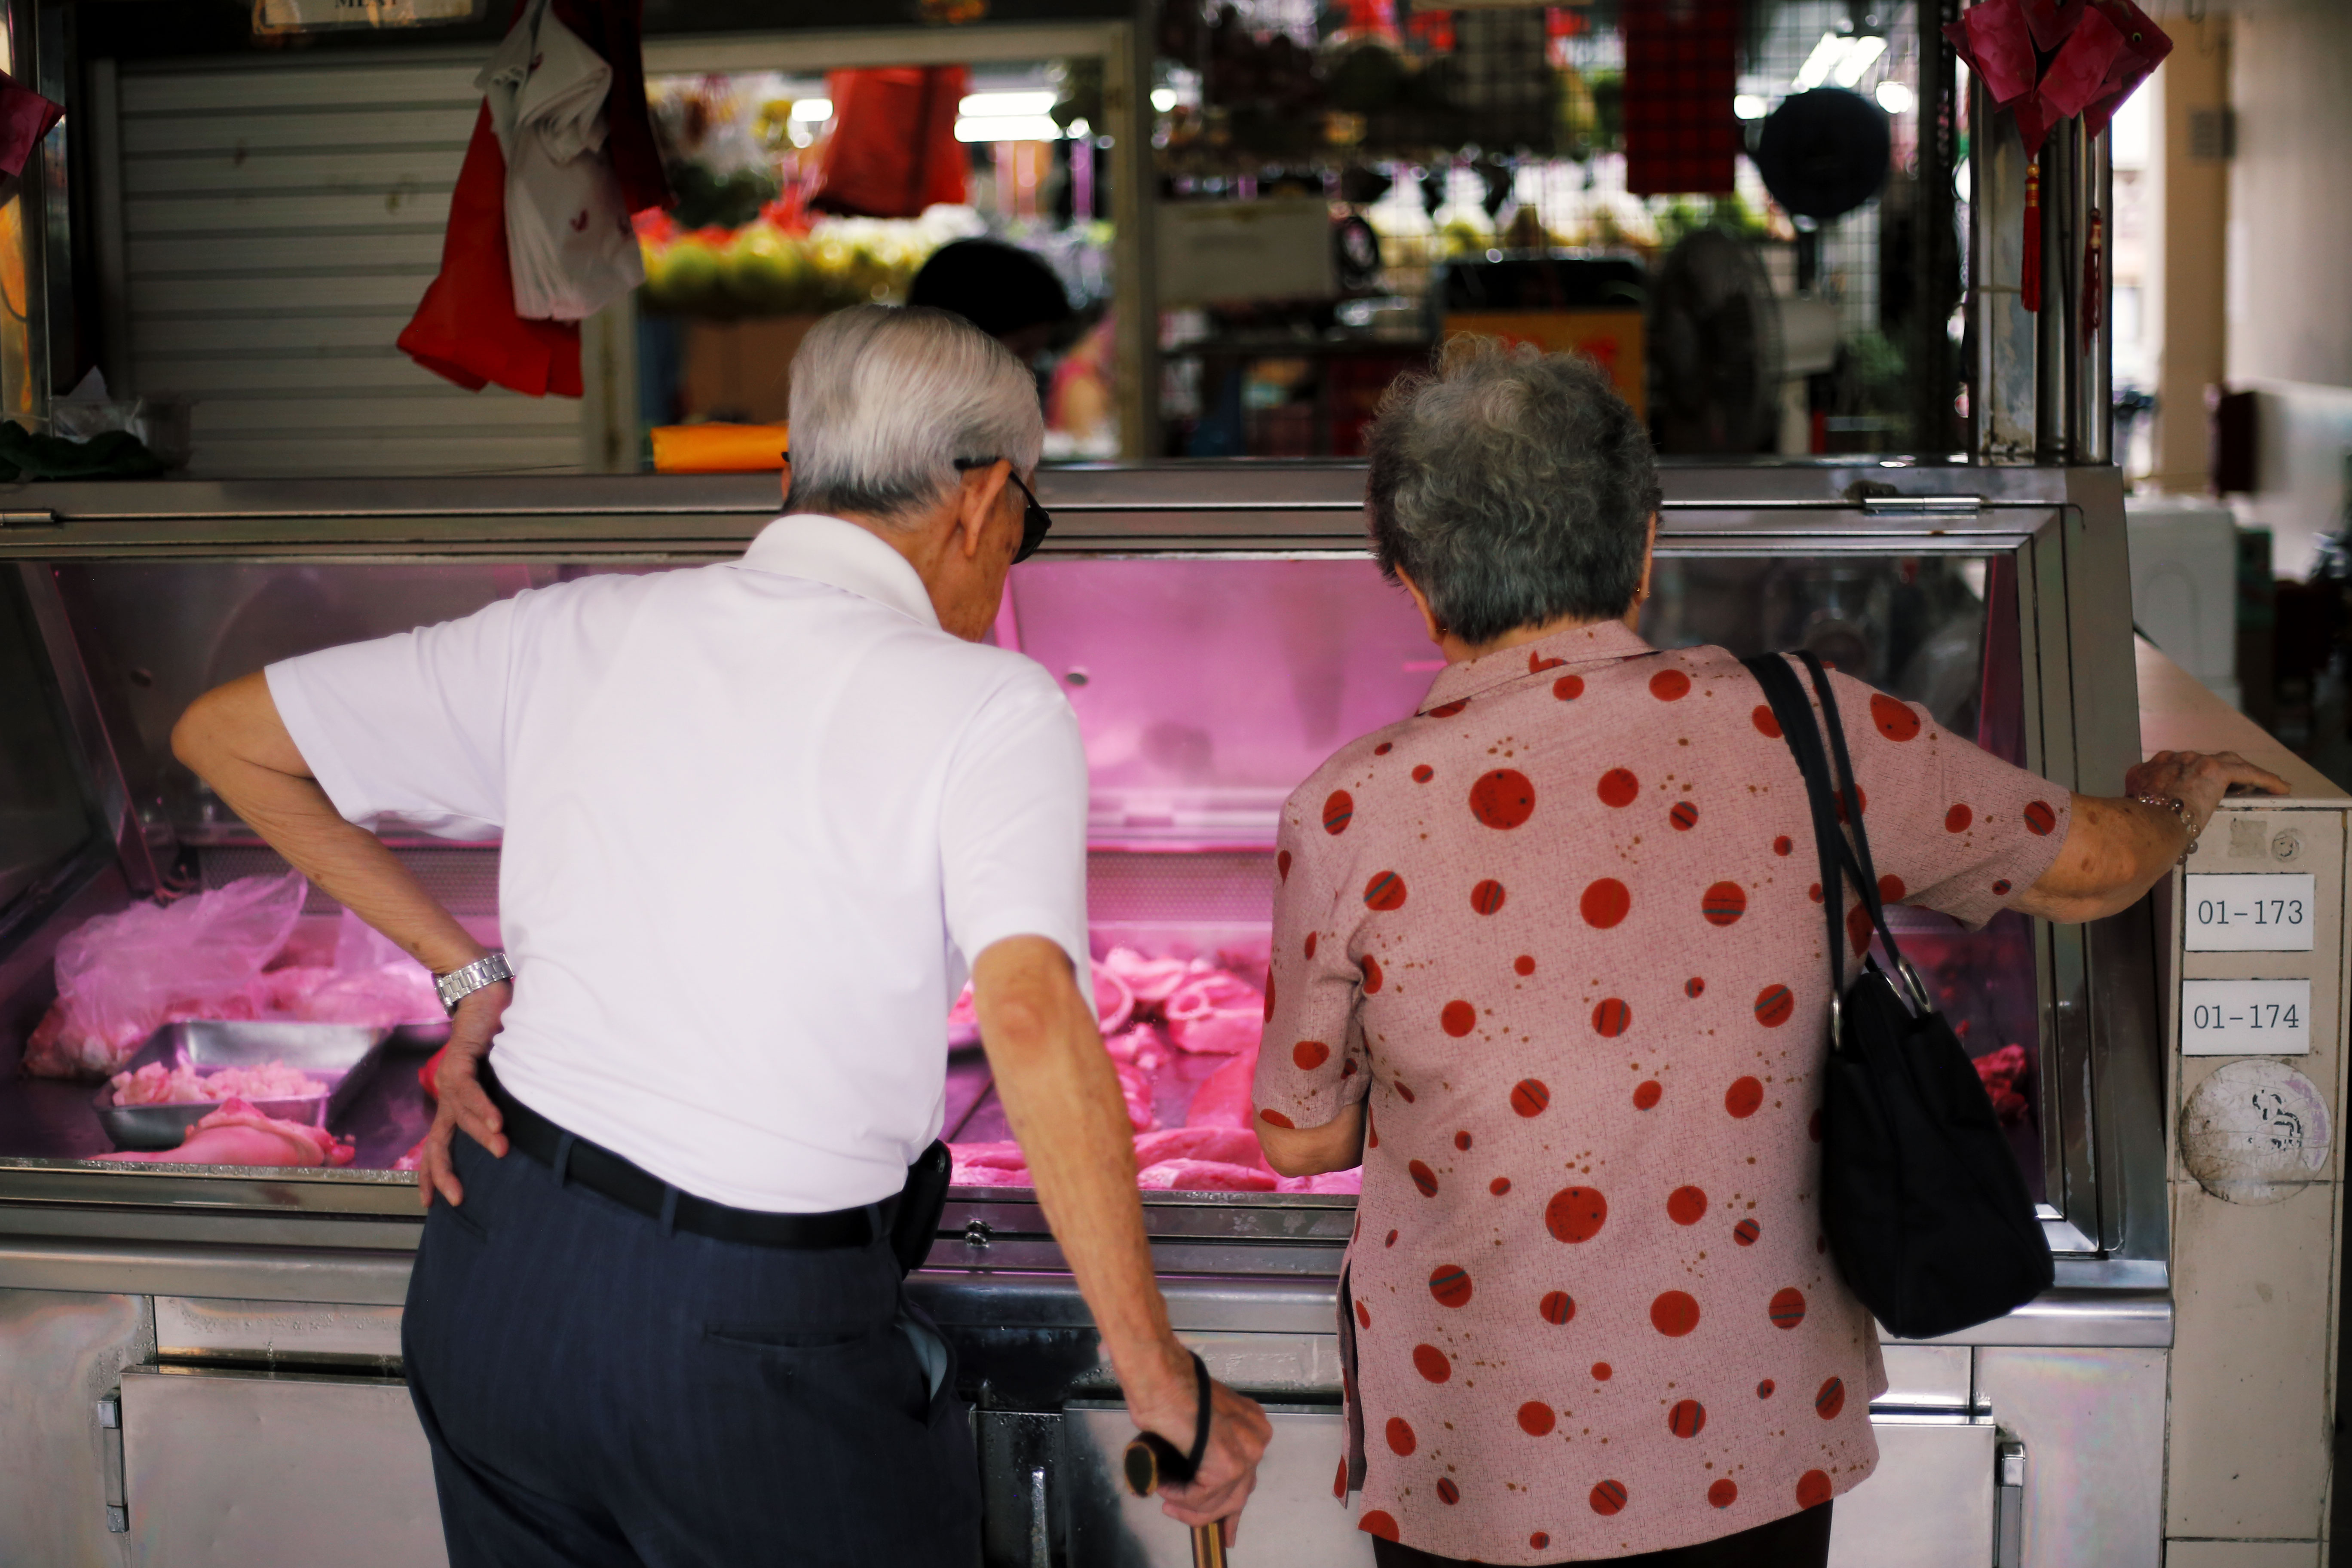 Younger Singaporeans Also Care About ‘Bread and Butter’ Issues